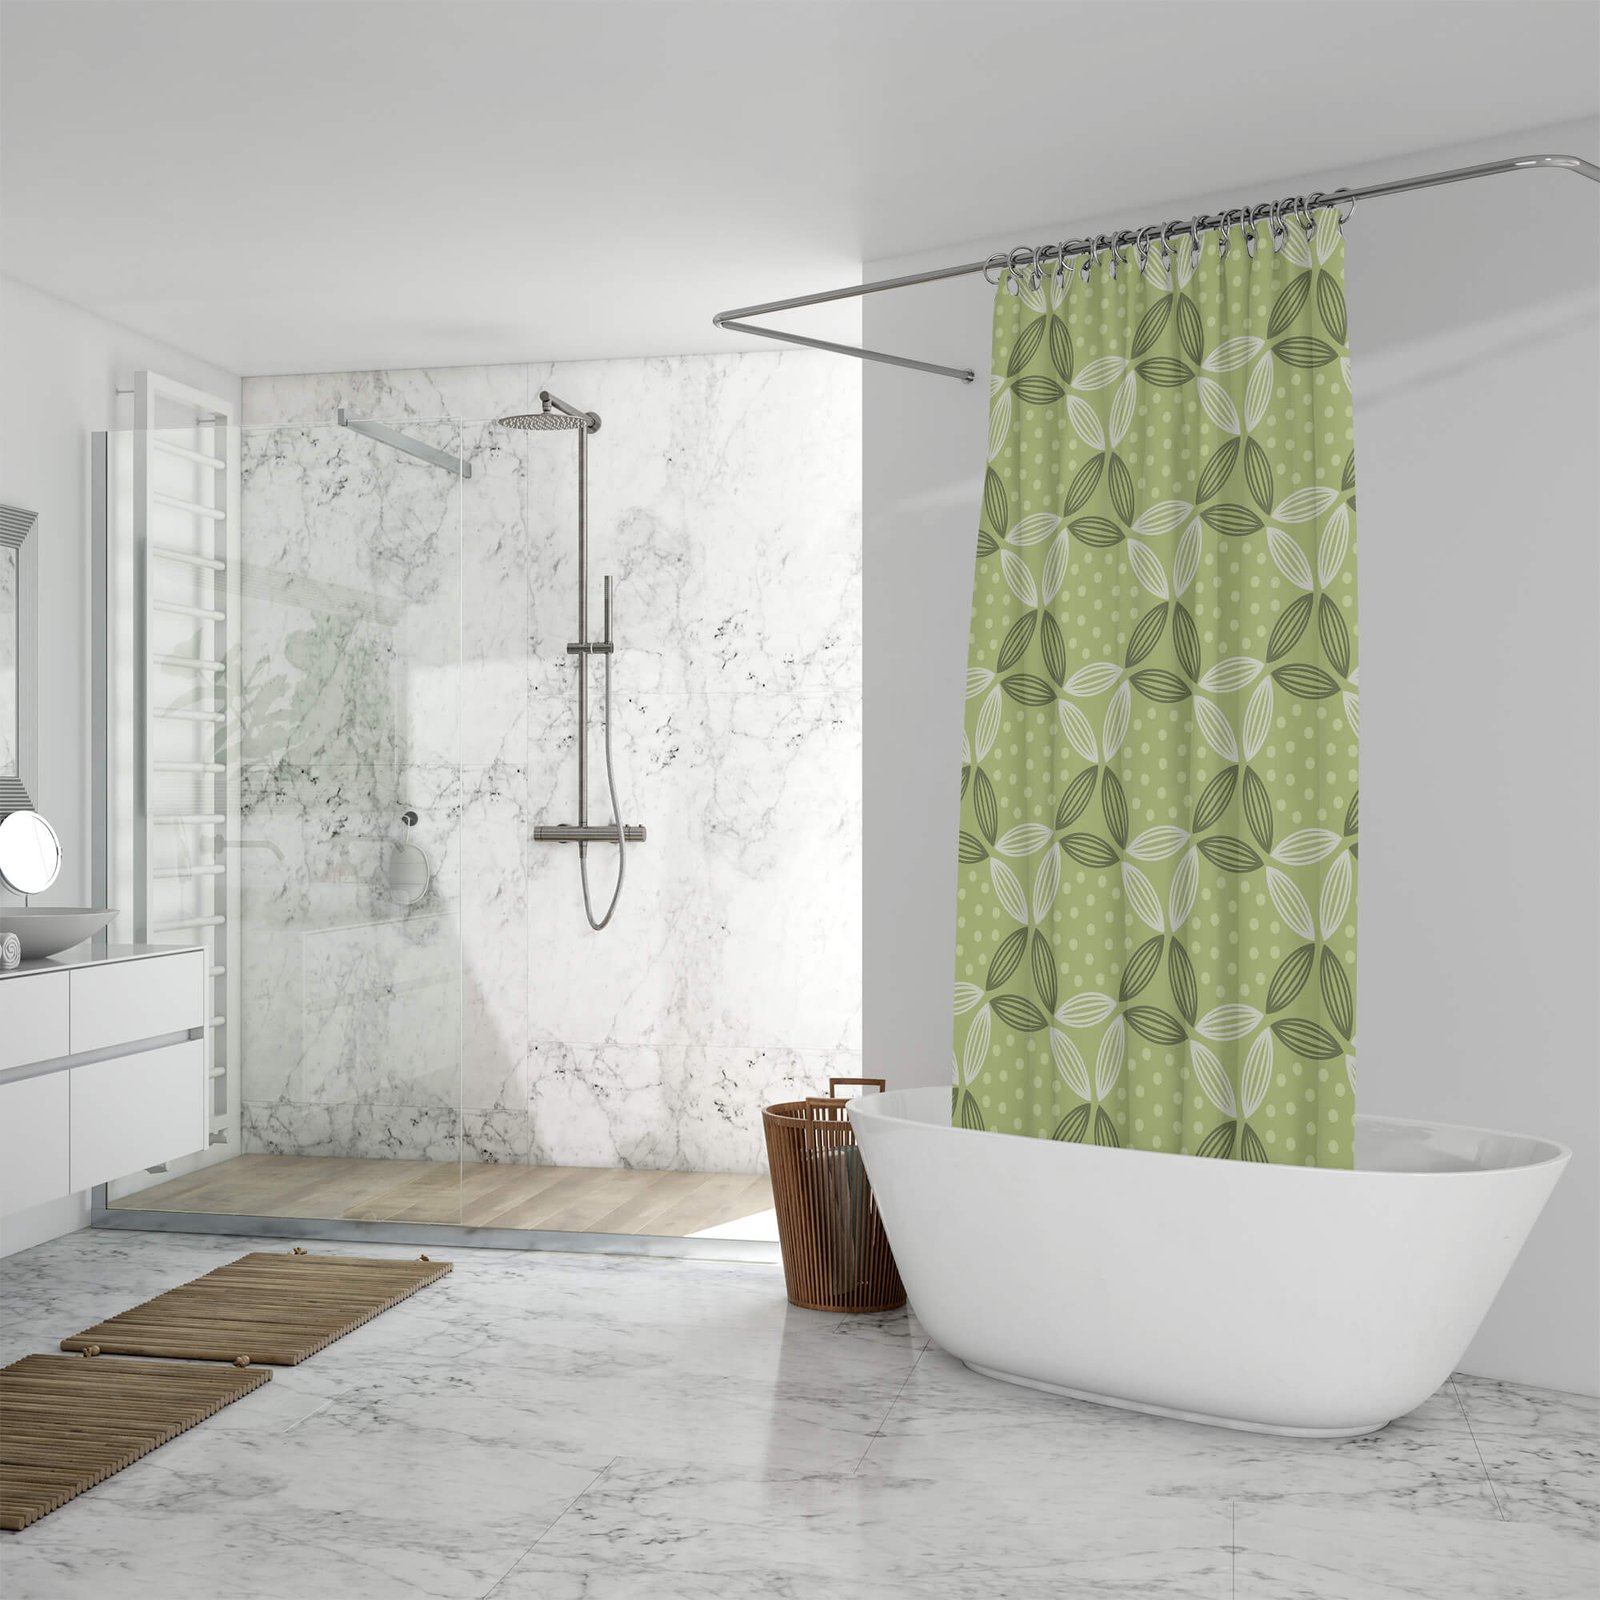 Free Shower Curtain Mockup PSD Template